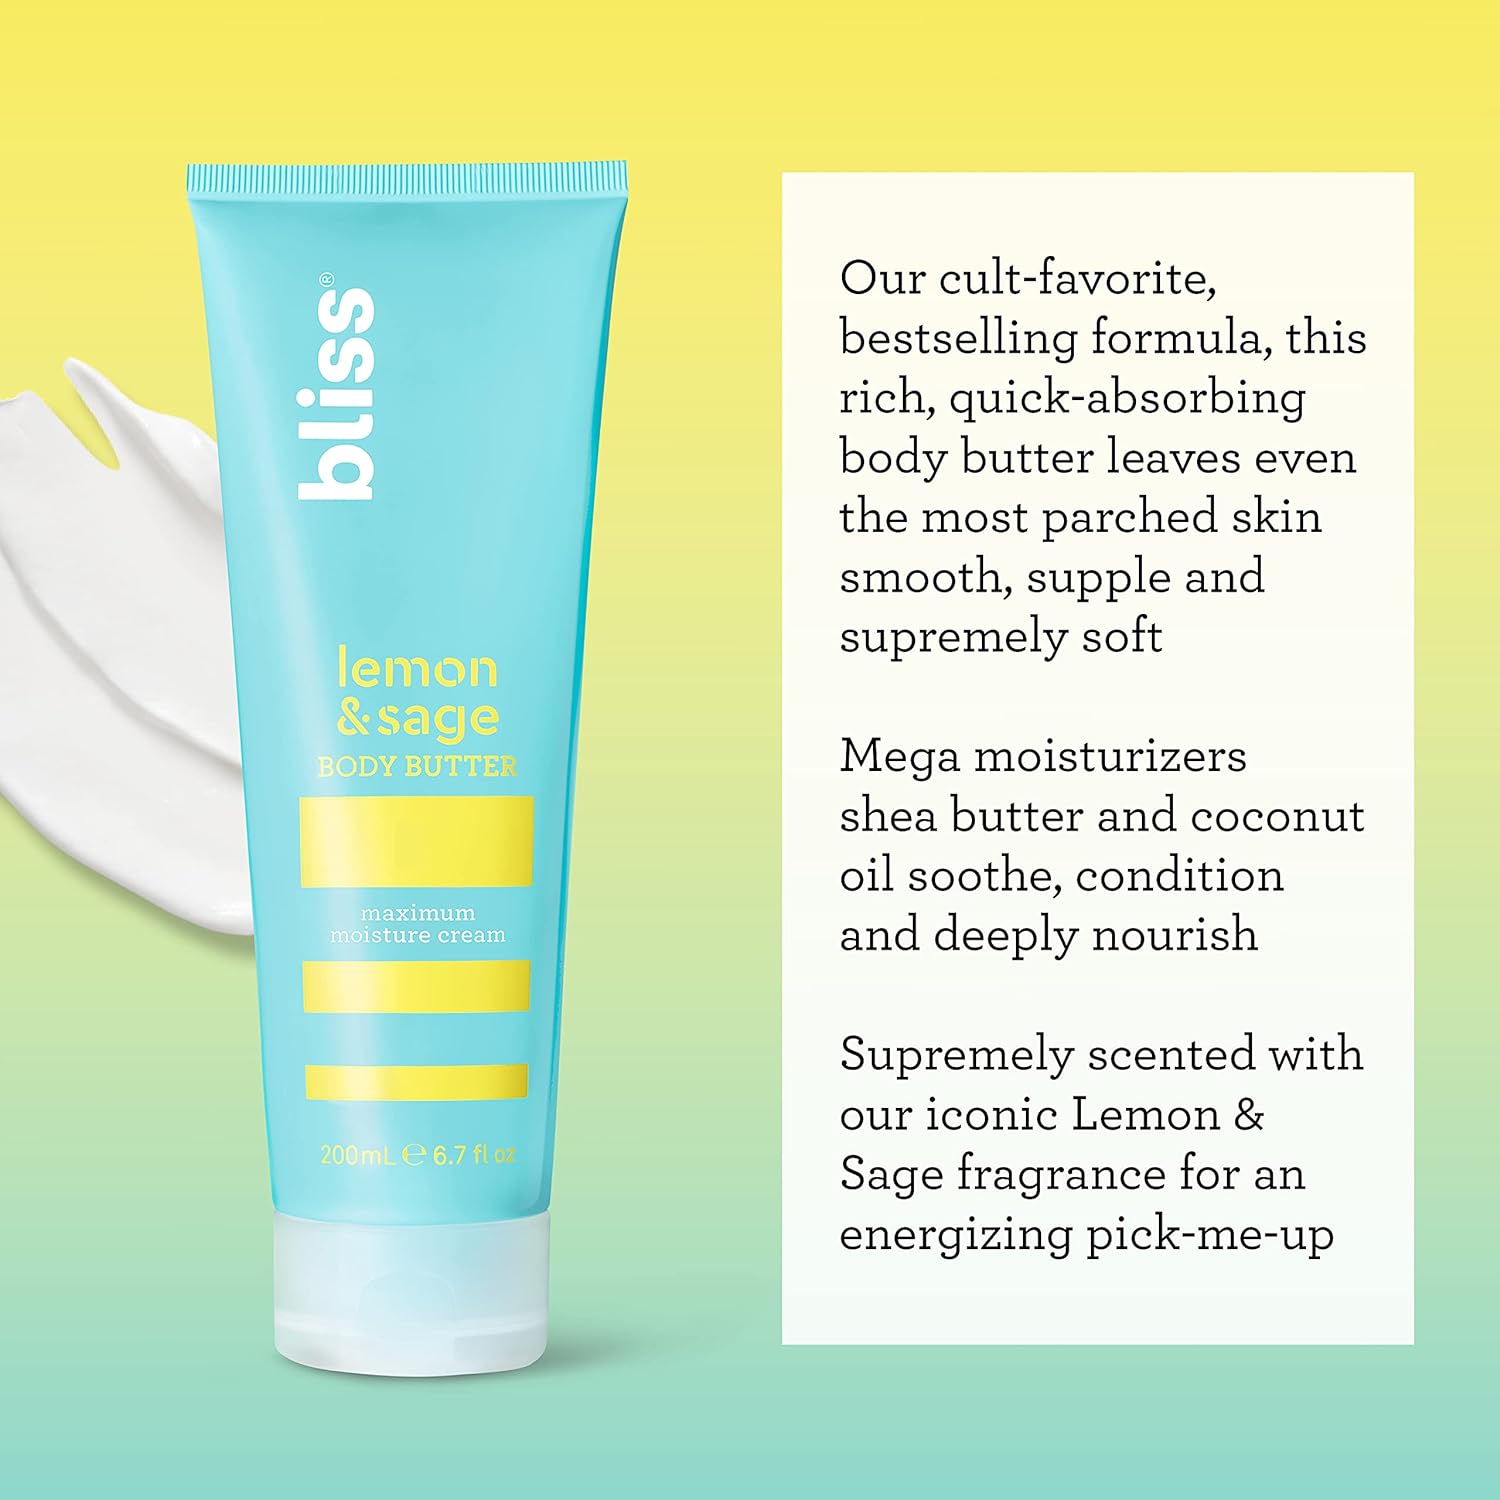 Bliss Body Butters Duo Lemon and Sage Body Butter and Grapefruit and Aloe - Maximum Moisture Cream - 6.7 Fl Oz Lotion for Dry Skin - Long-Lasting Moisturizer- Vegan and Cruelty-Free : Beauty & Personal Care